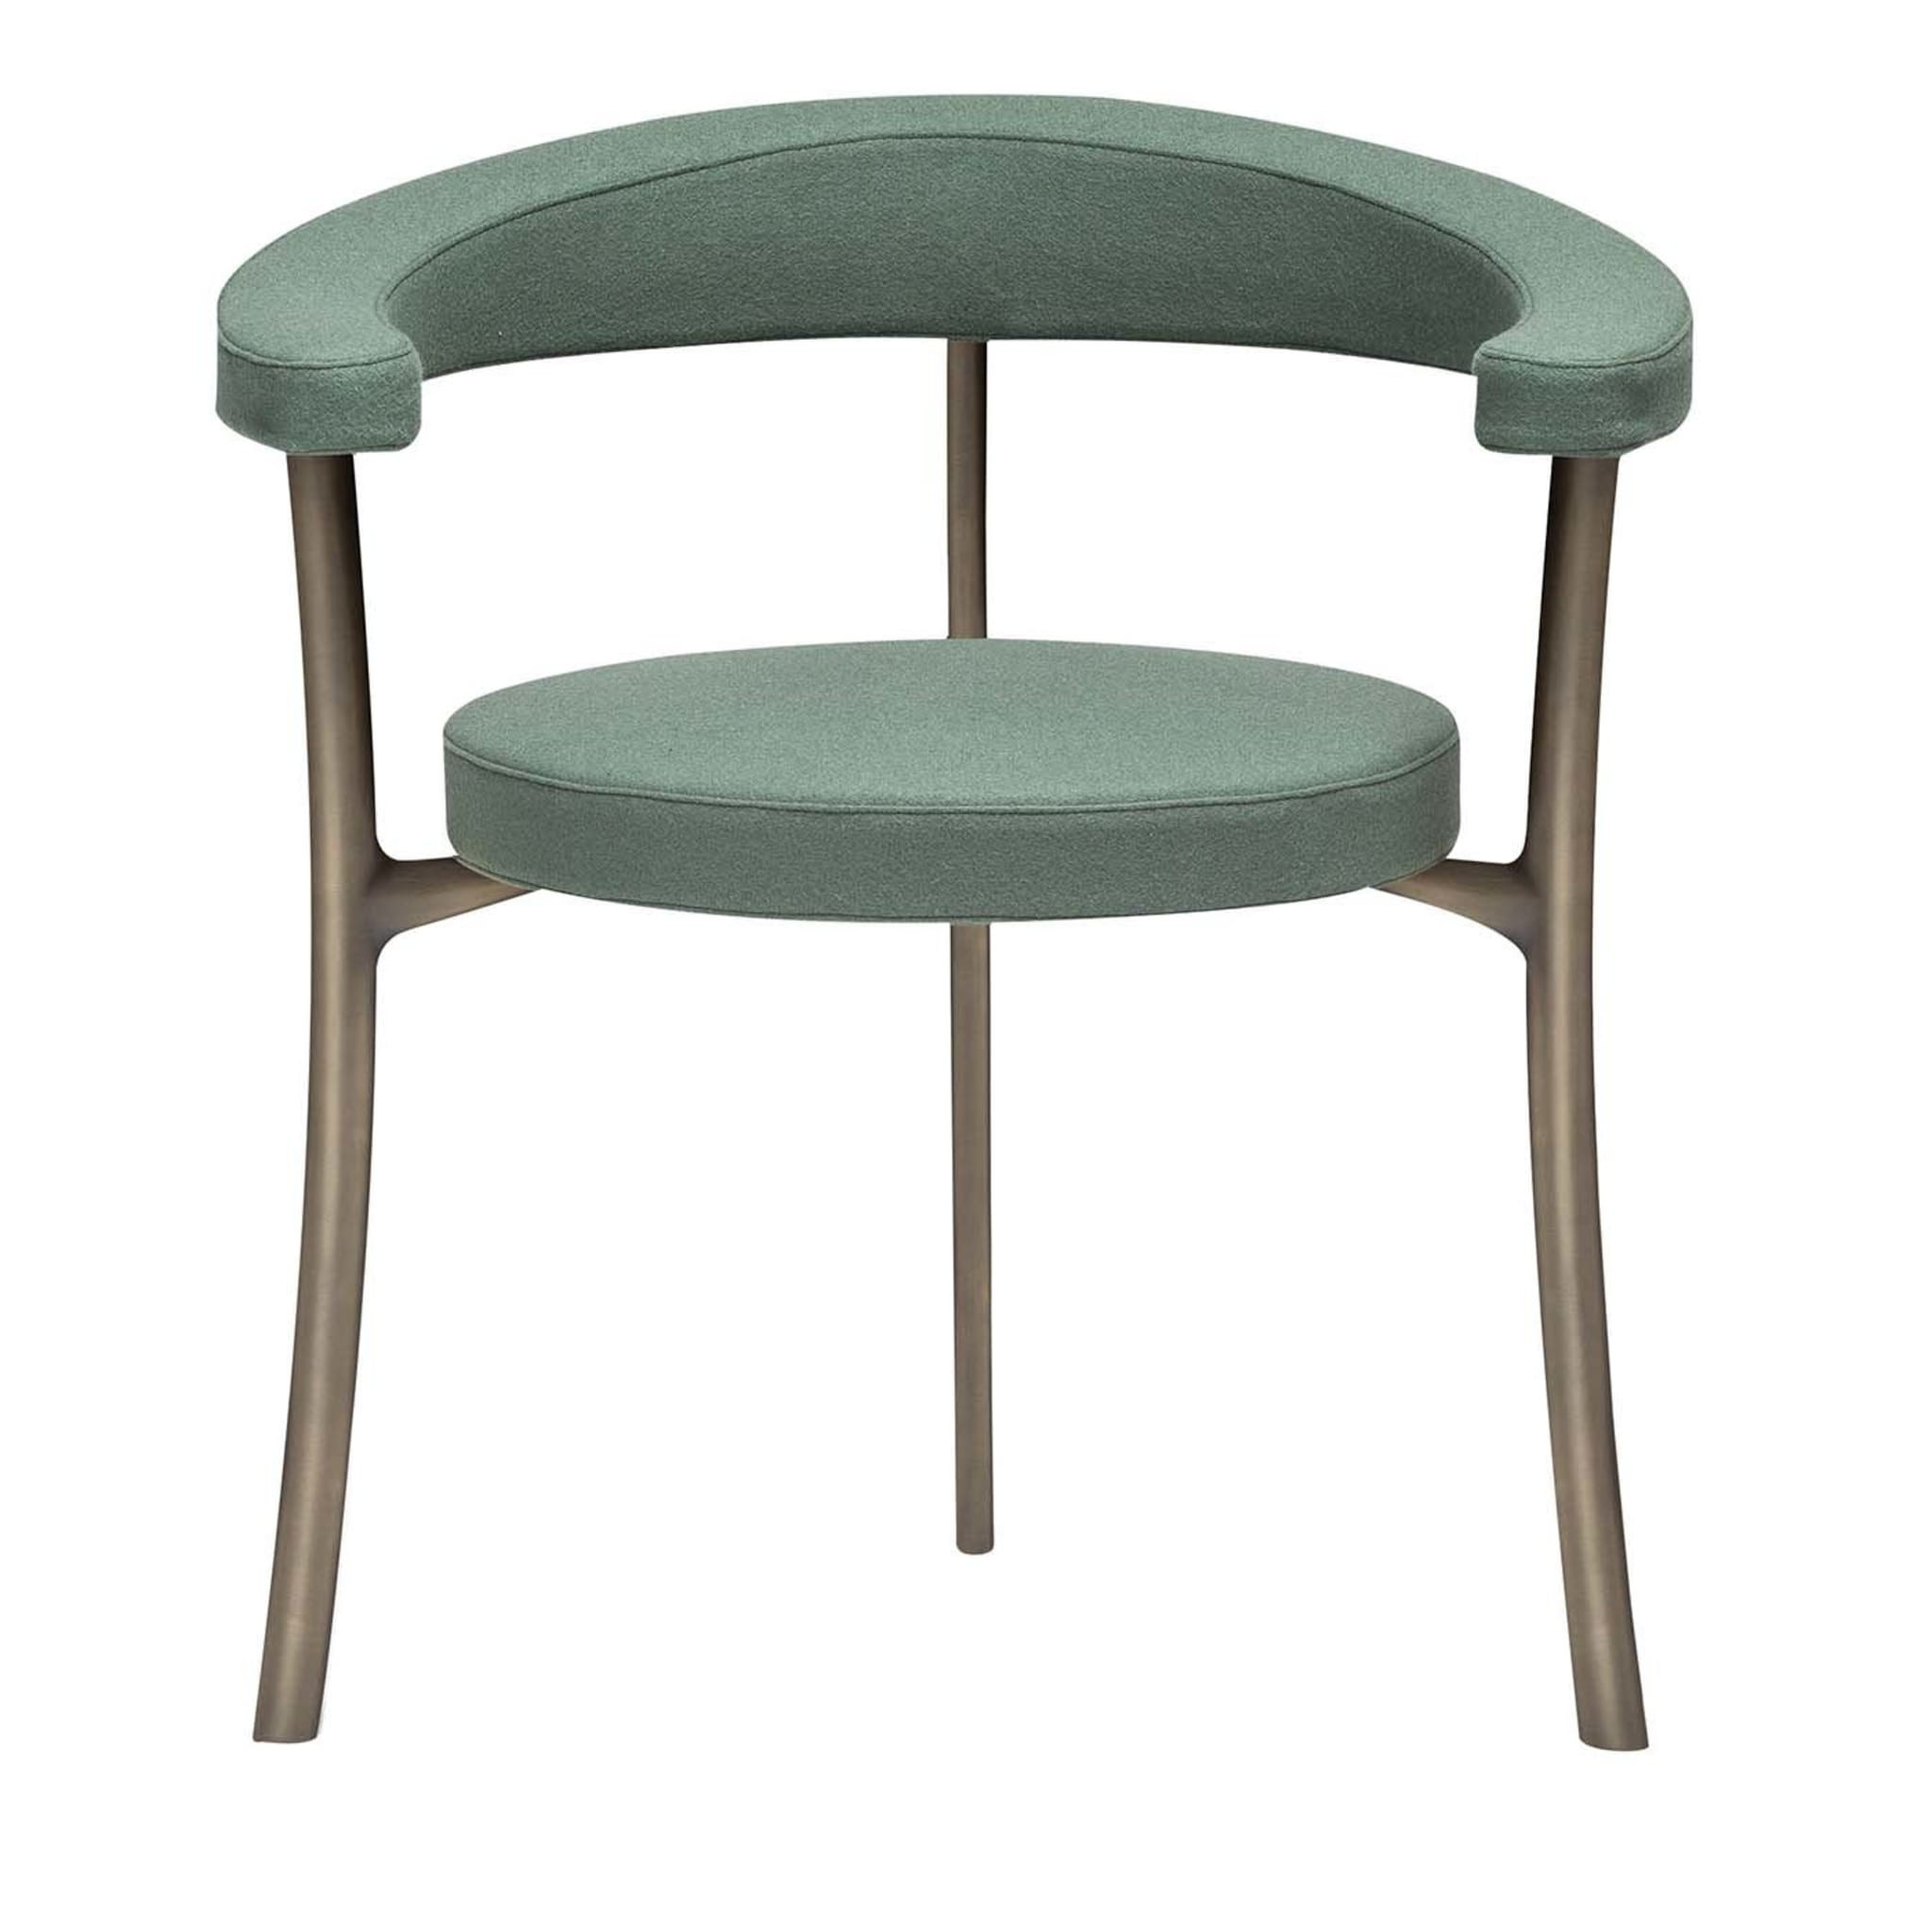 Katana Chair Olive-Green by Paolo Rizzatto - Main view